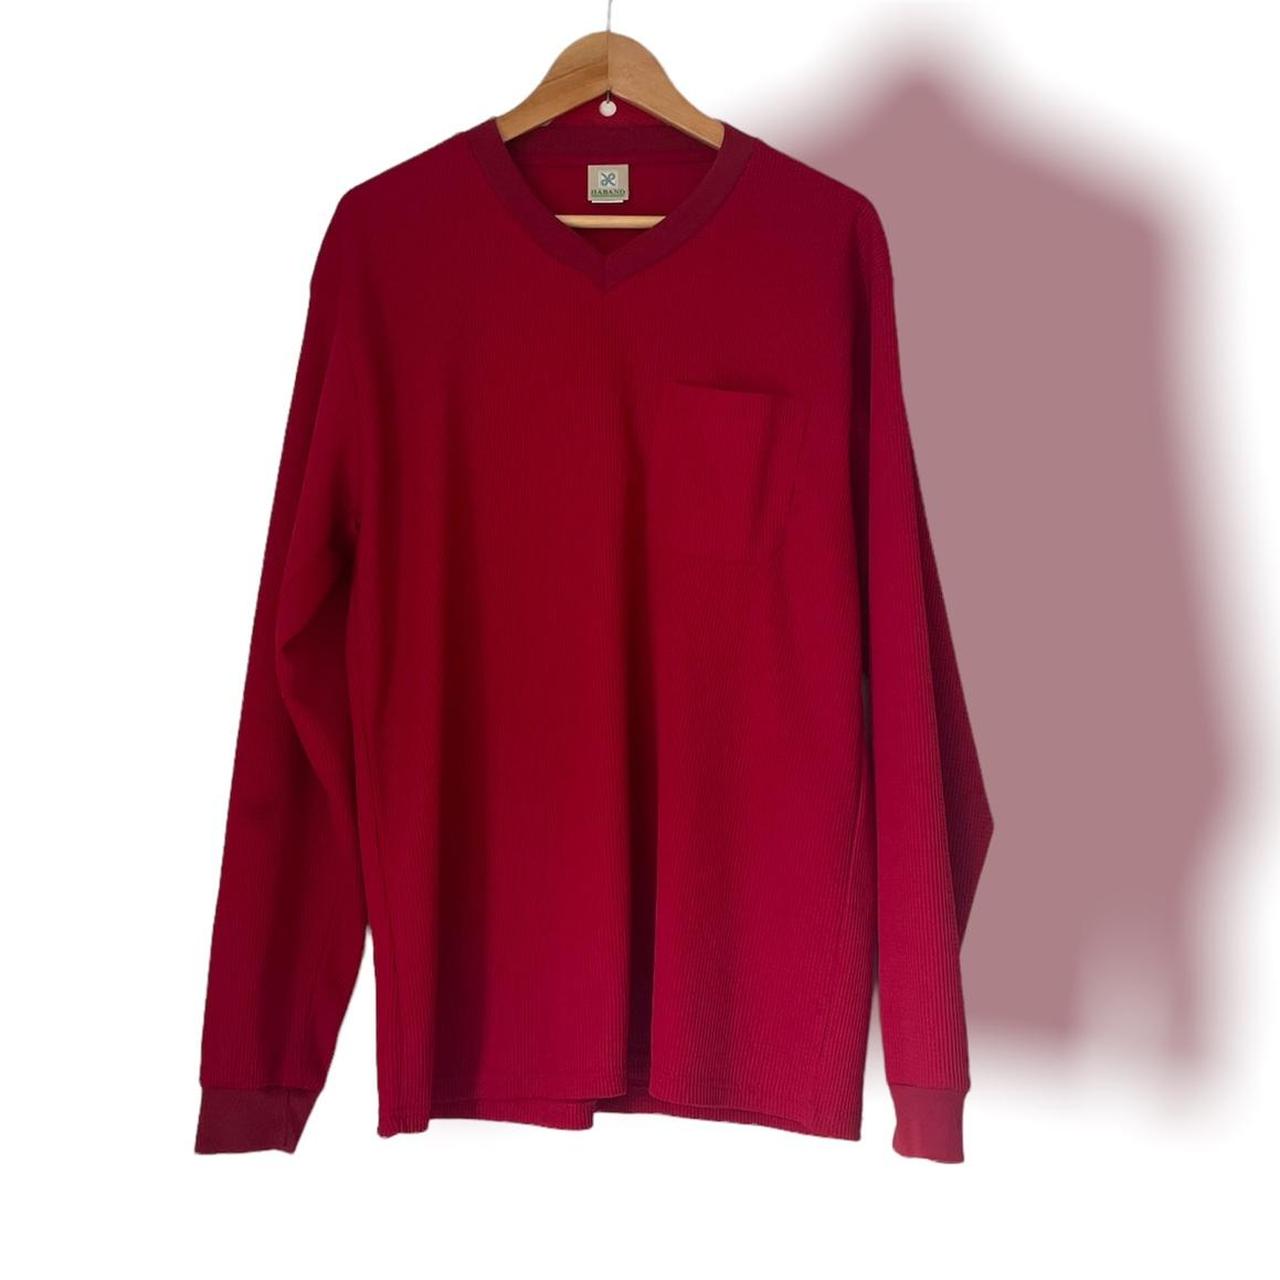 Product Image 1 - Red jersey v-neck long sleeve